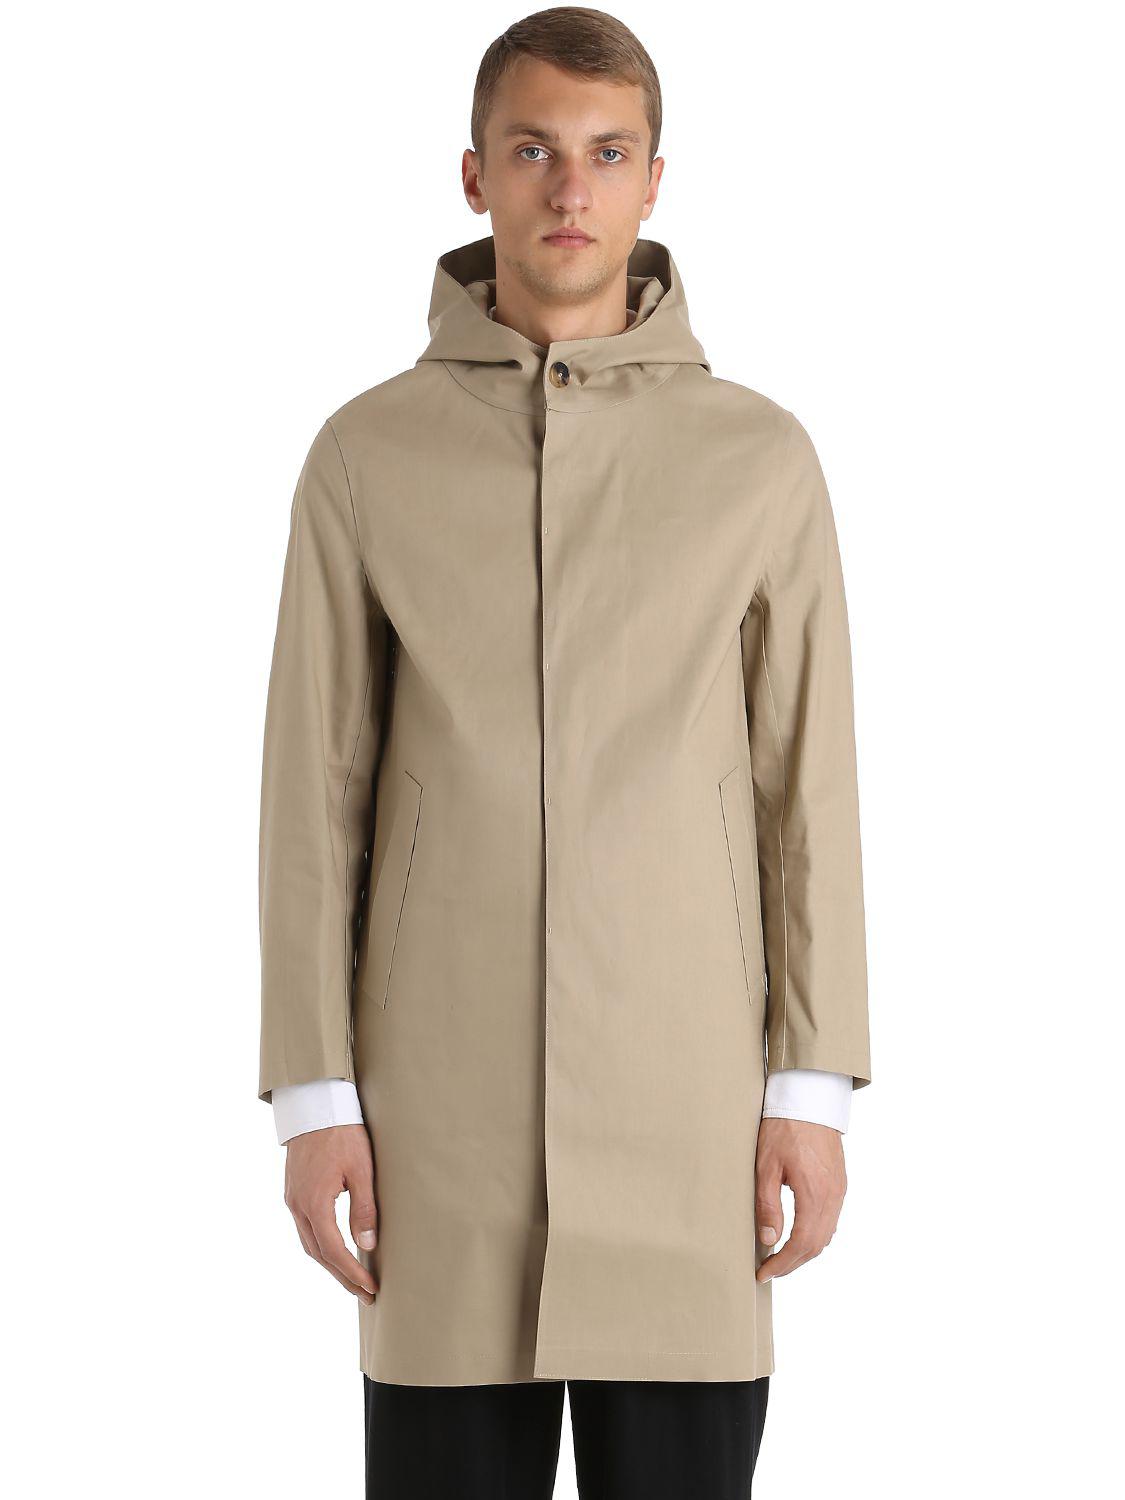 Mackintosh Hooded Rubberized Cotton Coat In Beige Natural For